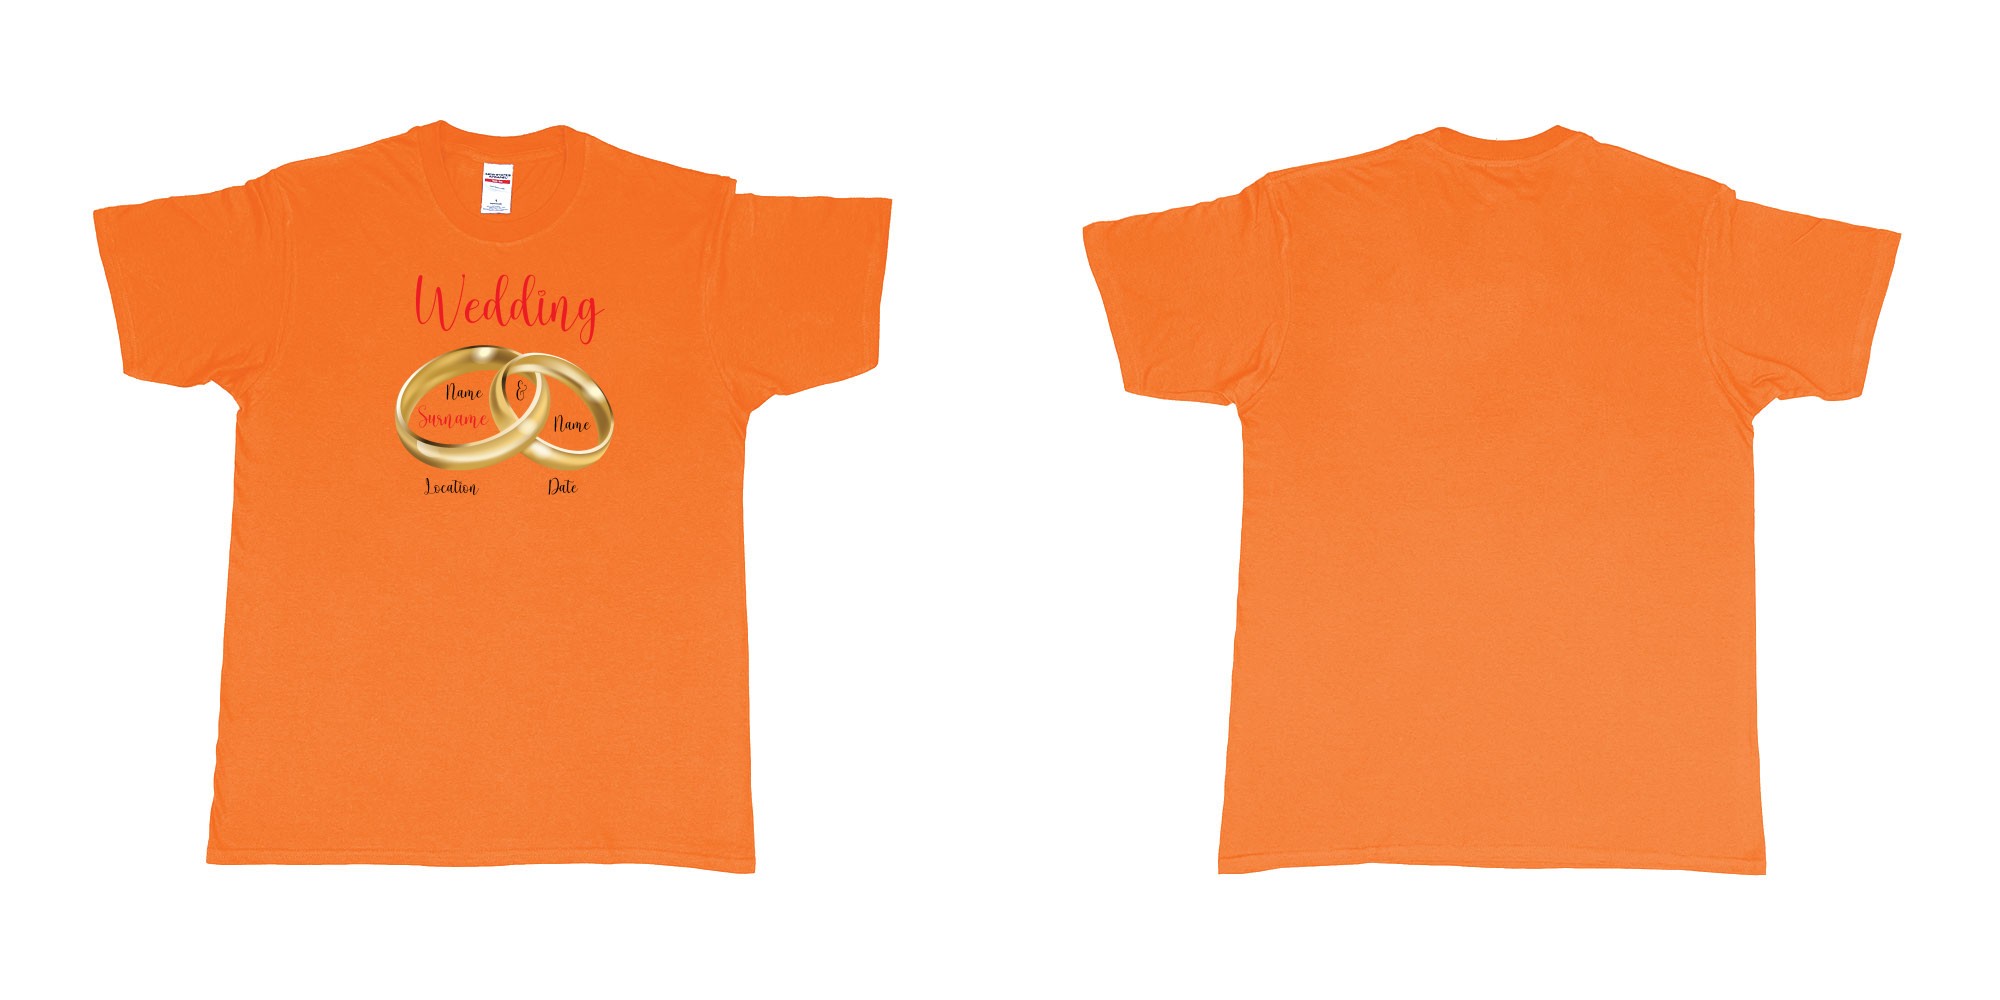 Custom tshirt design wedding rings in fabric color orange choice your own text made in Bali by The Pirate Way